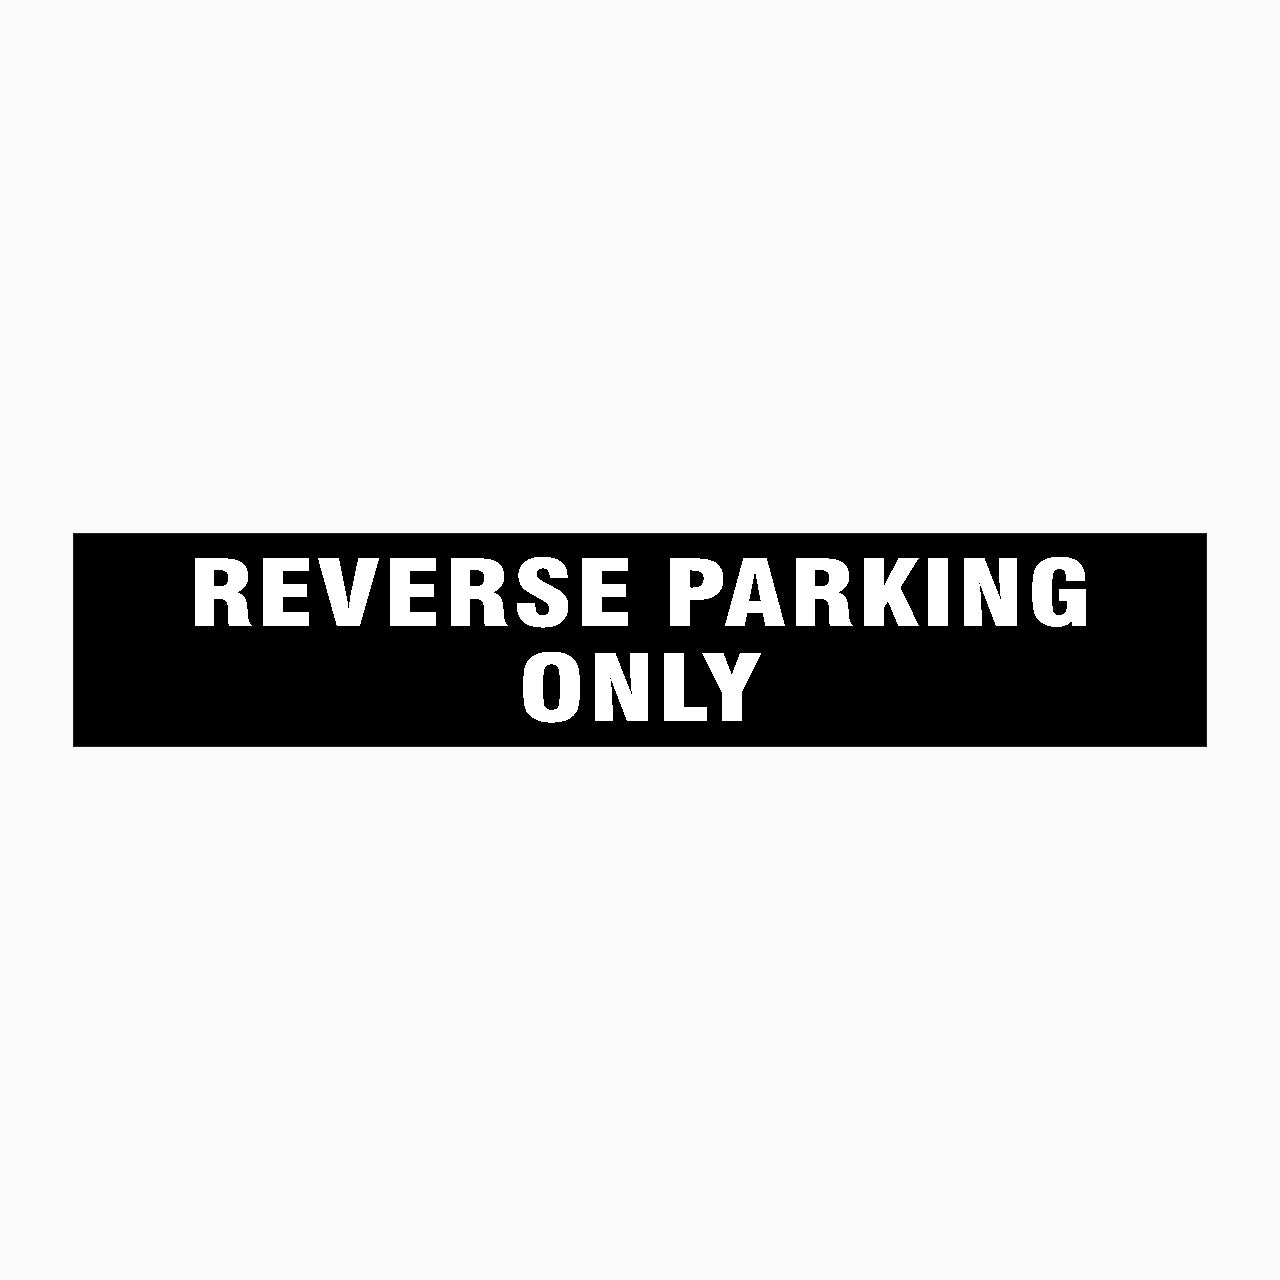 REVERSE PARKING ONLY SIGN